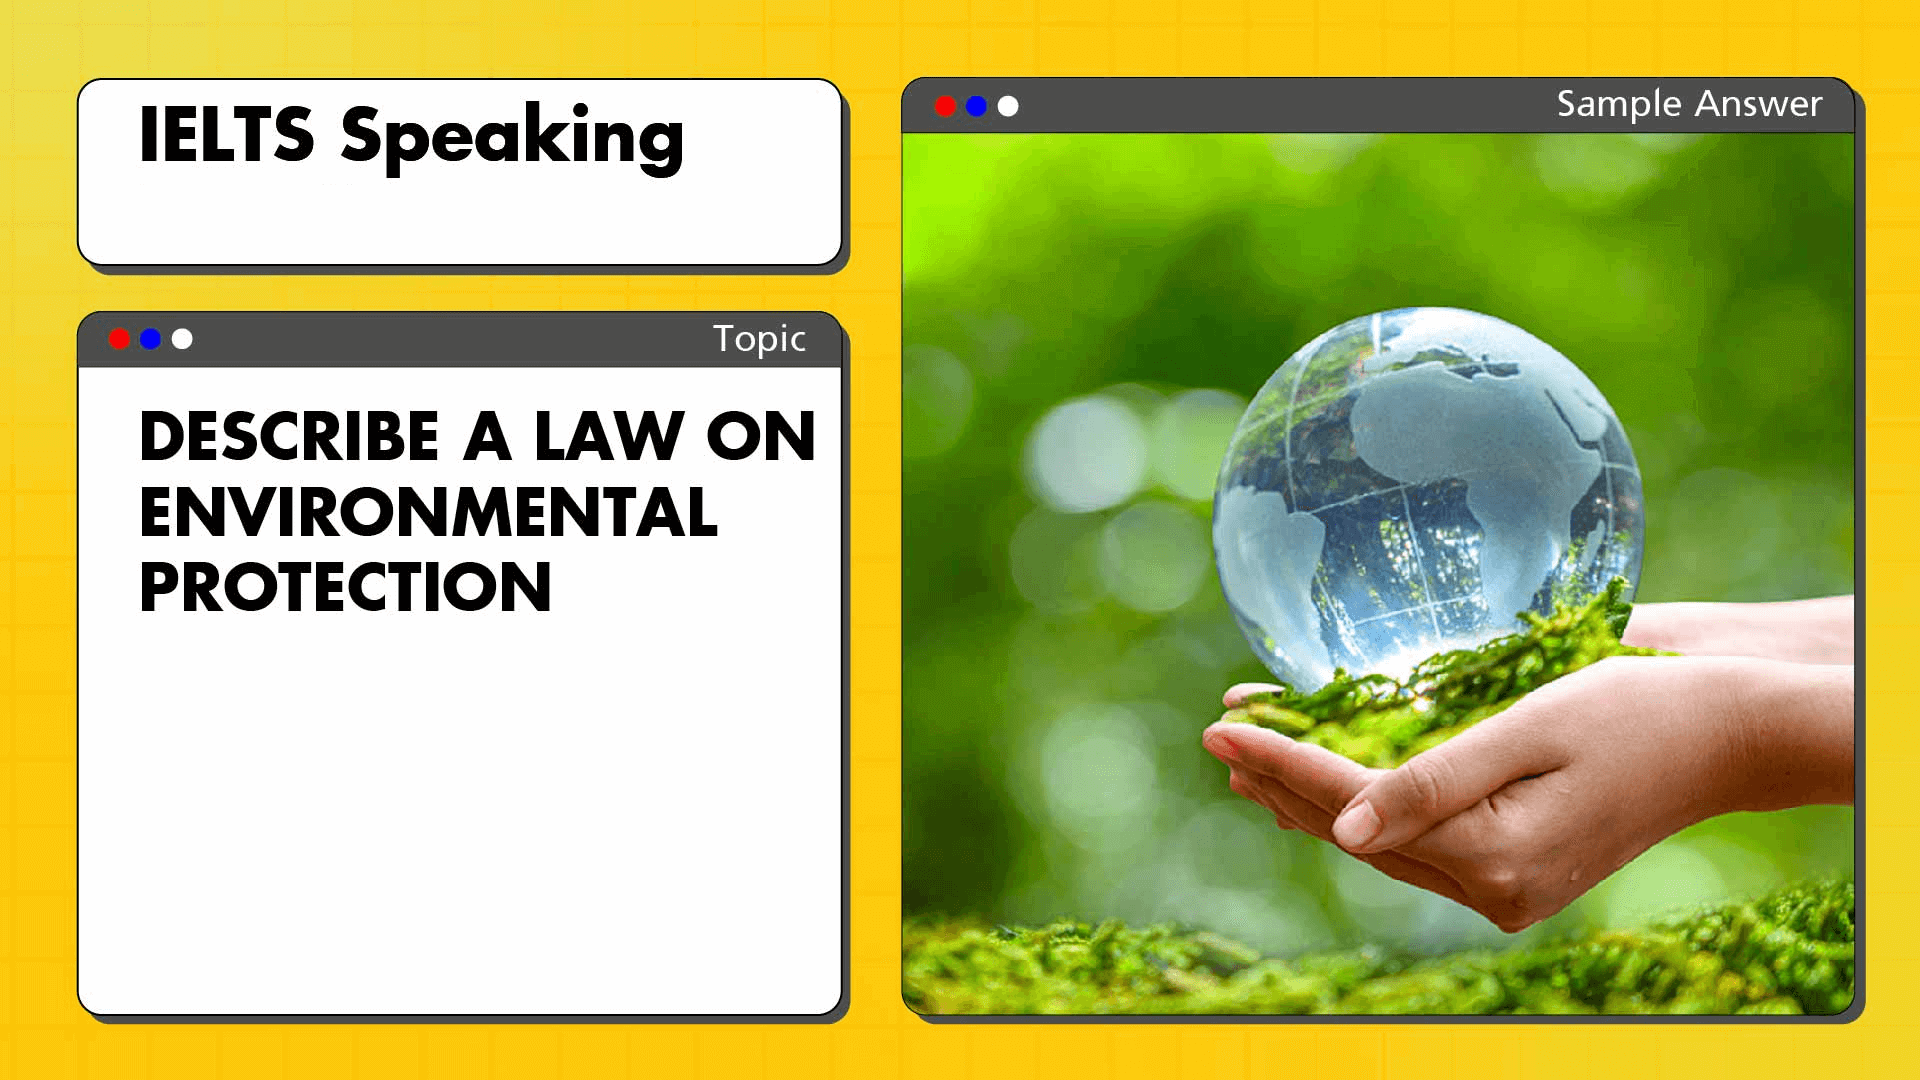 IELTS Speaking Part 3 sample Describe a law on environmental protection